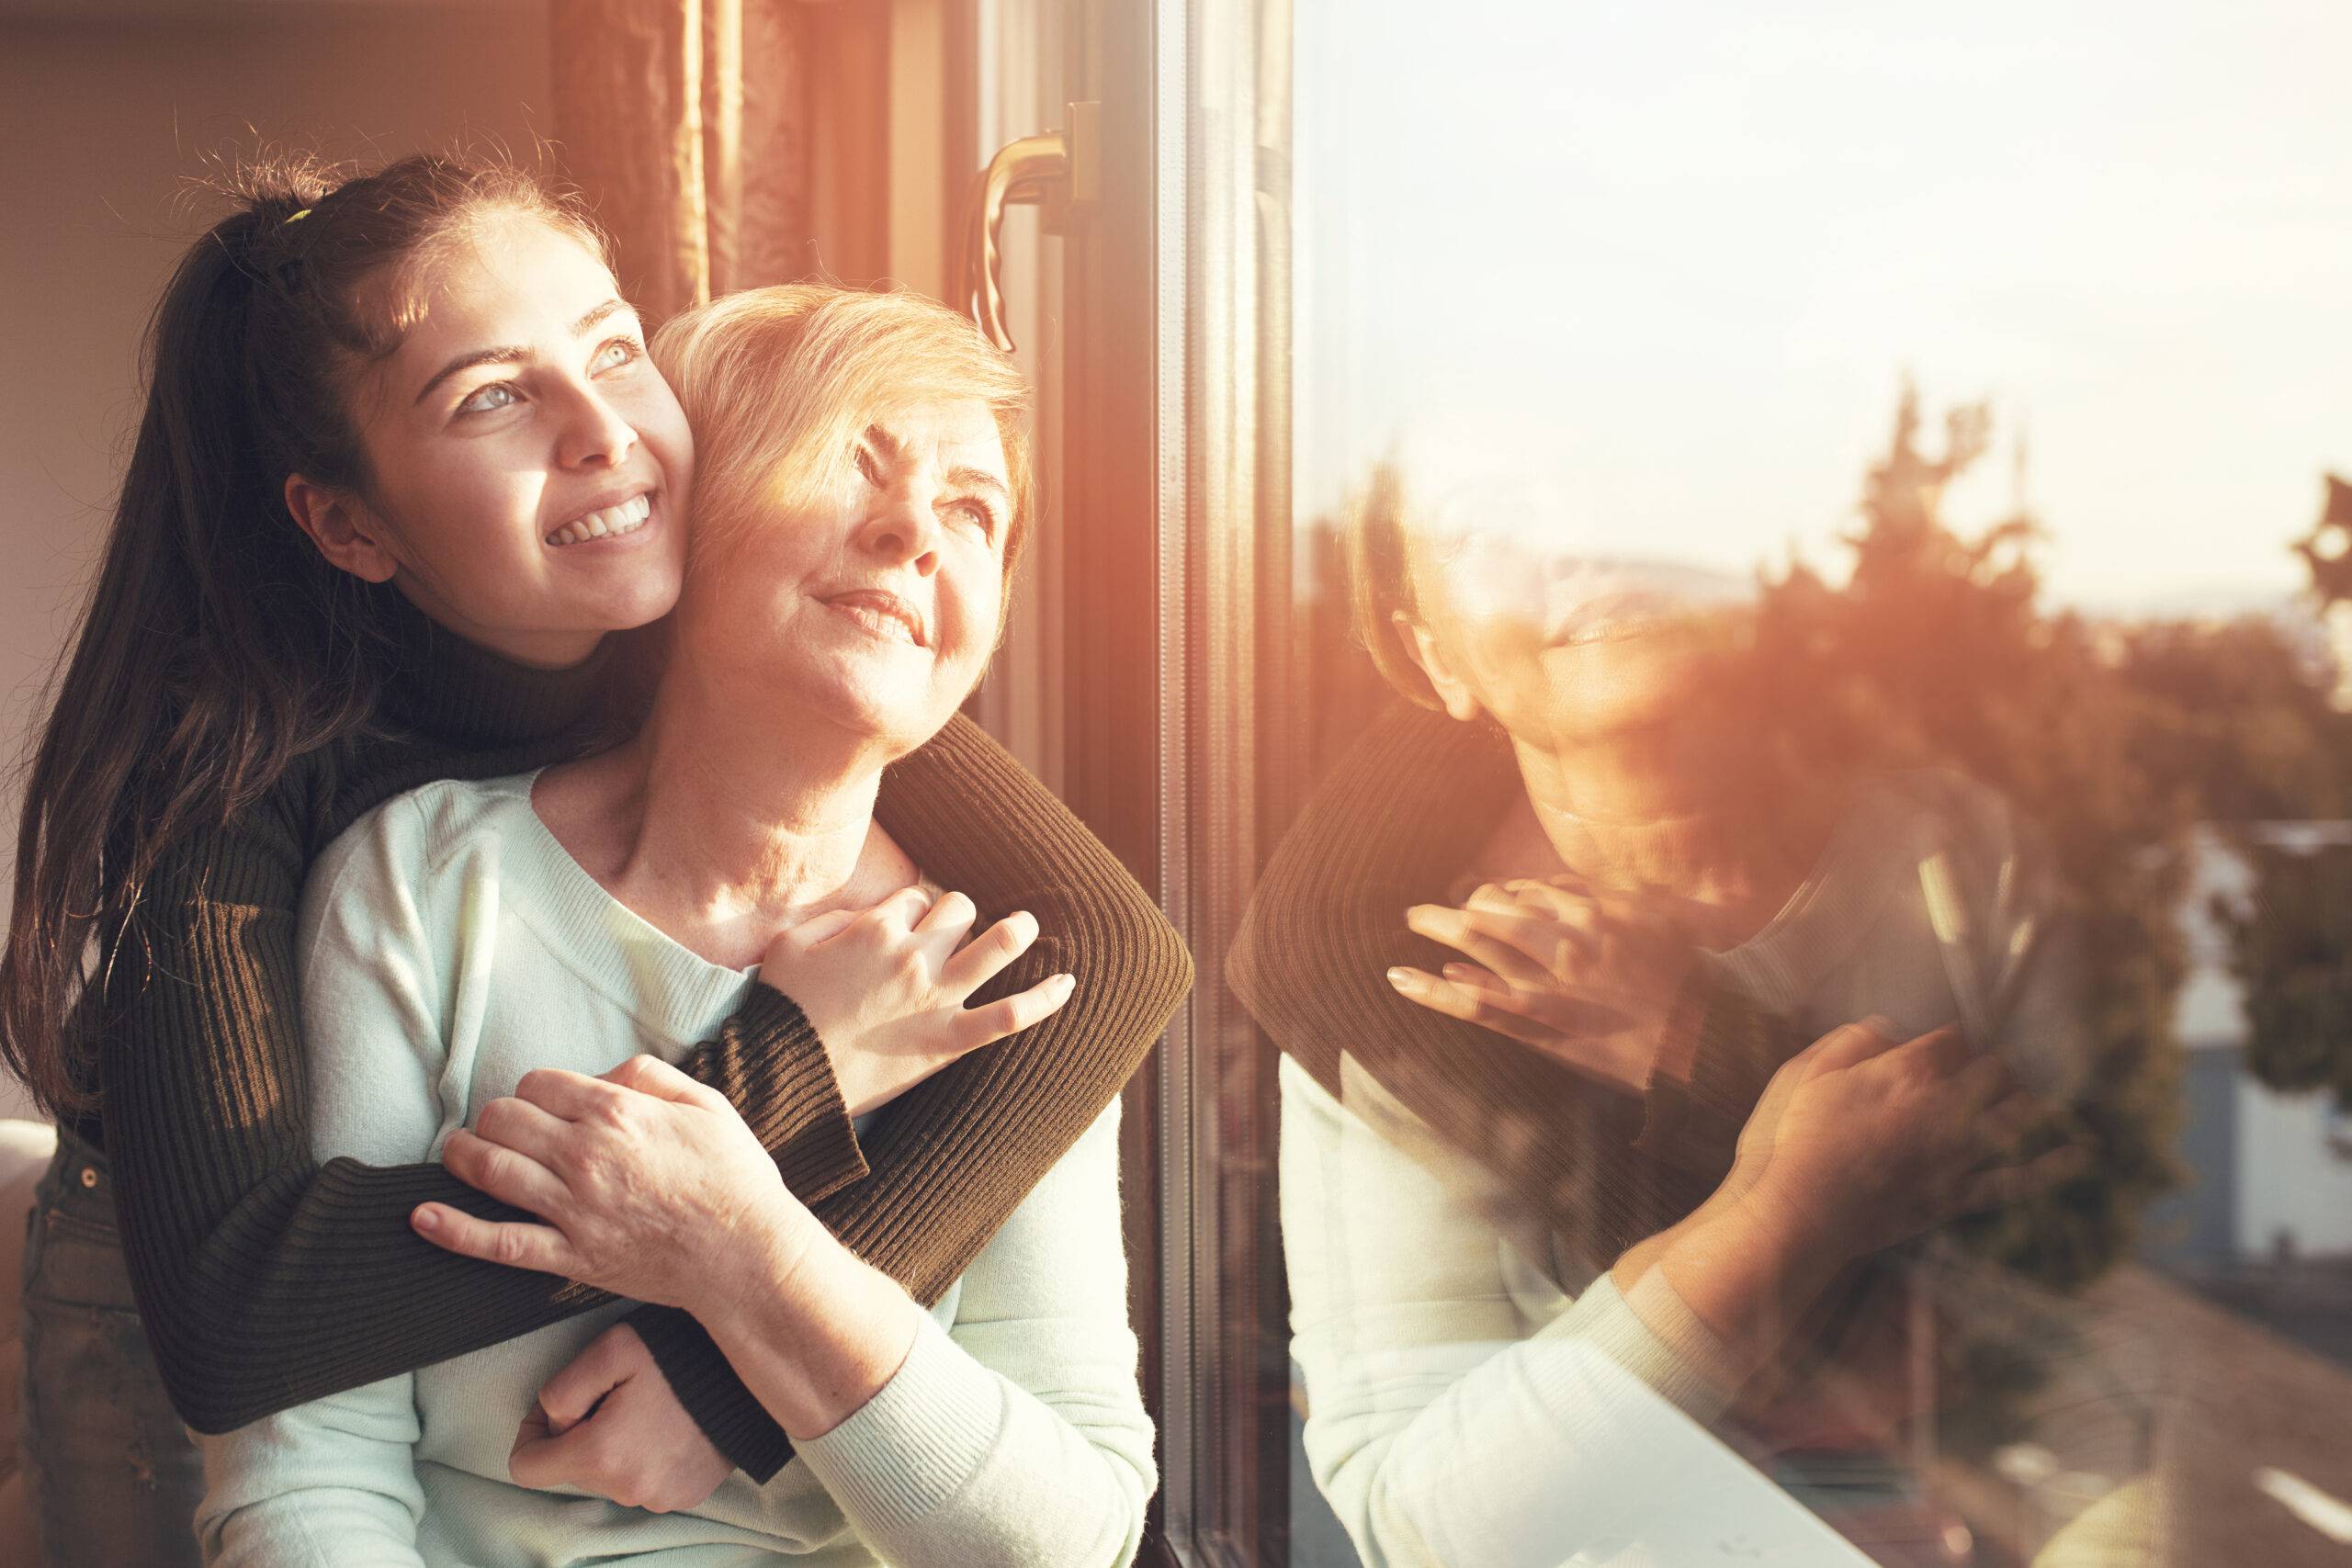 Young person hugging an older woman, looking out the window with the sun shining on their smiling faces.